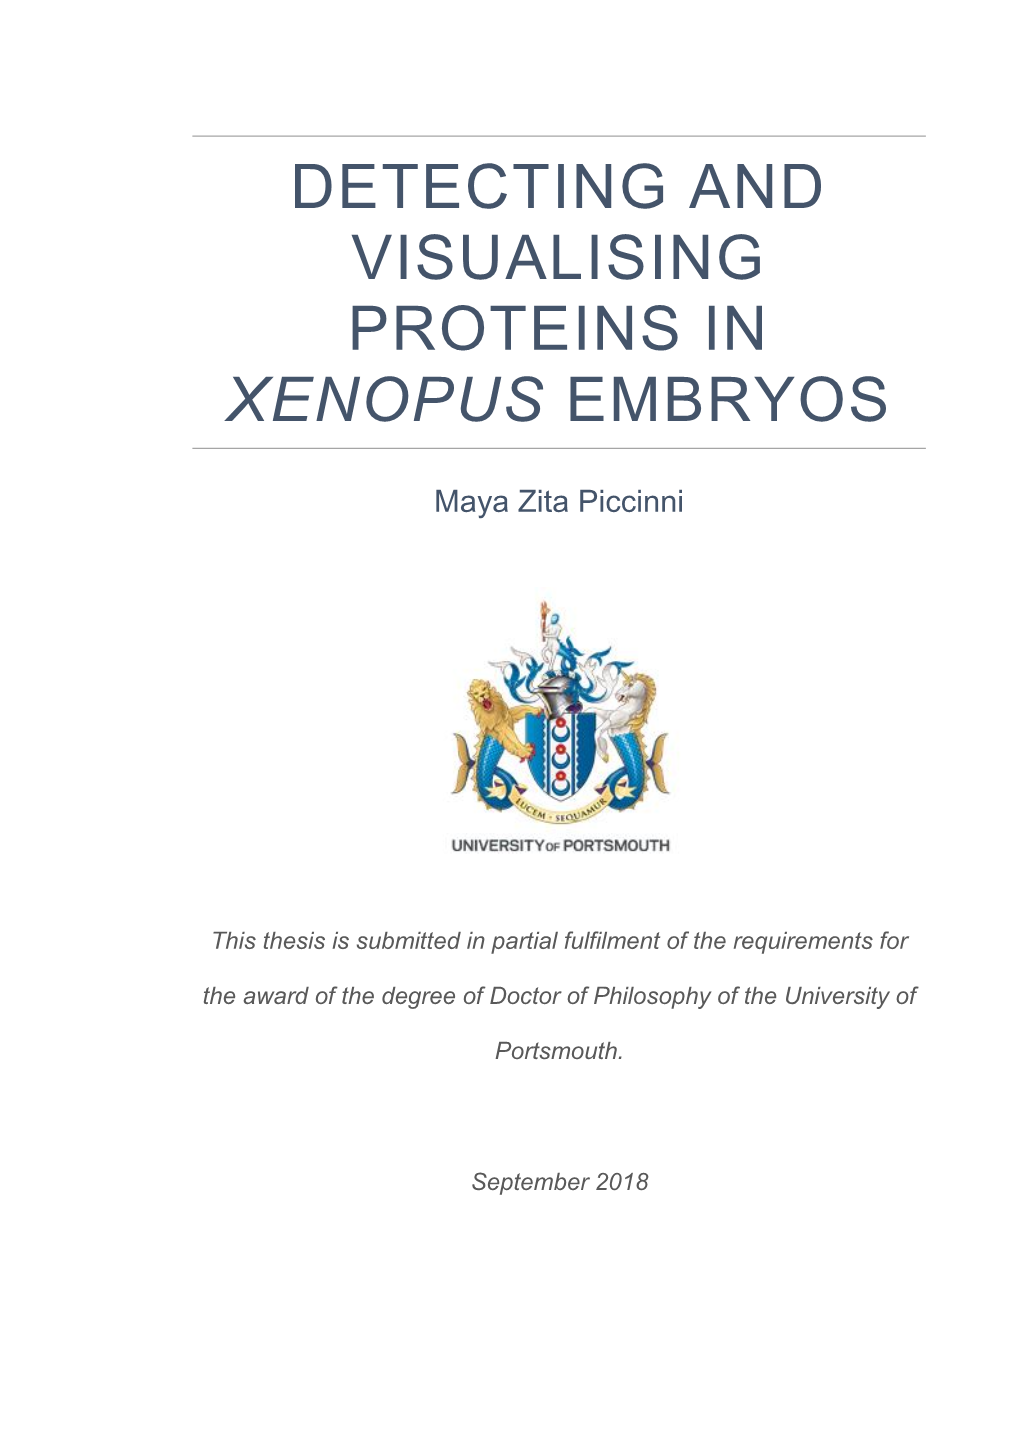 Detecting and Visualising Proteins in Xenopus Embryos